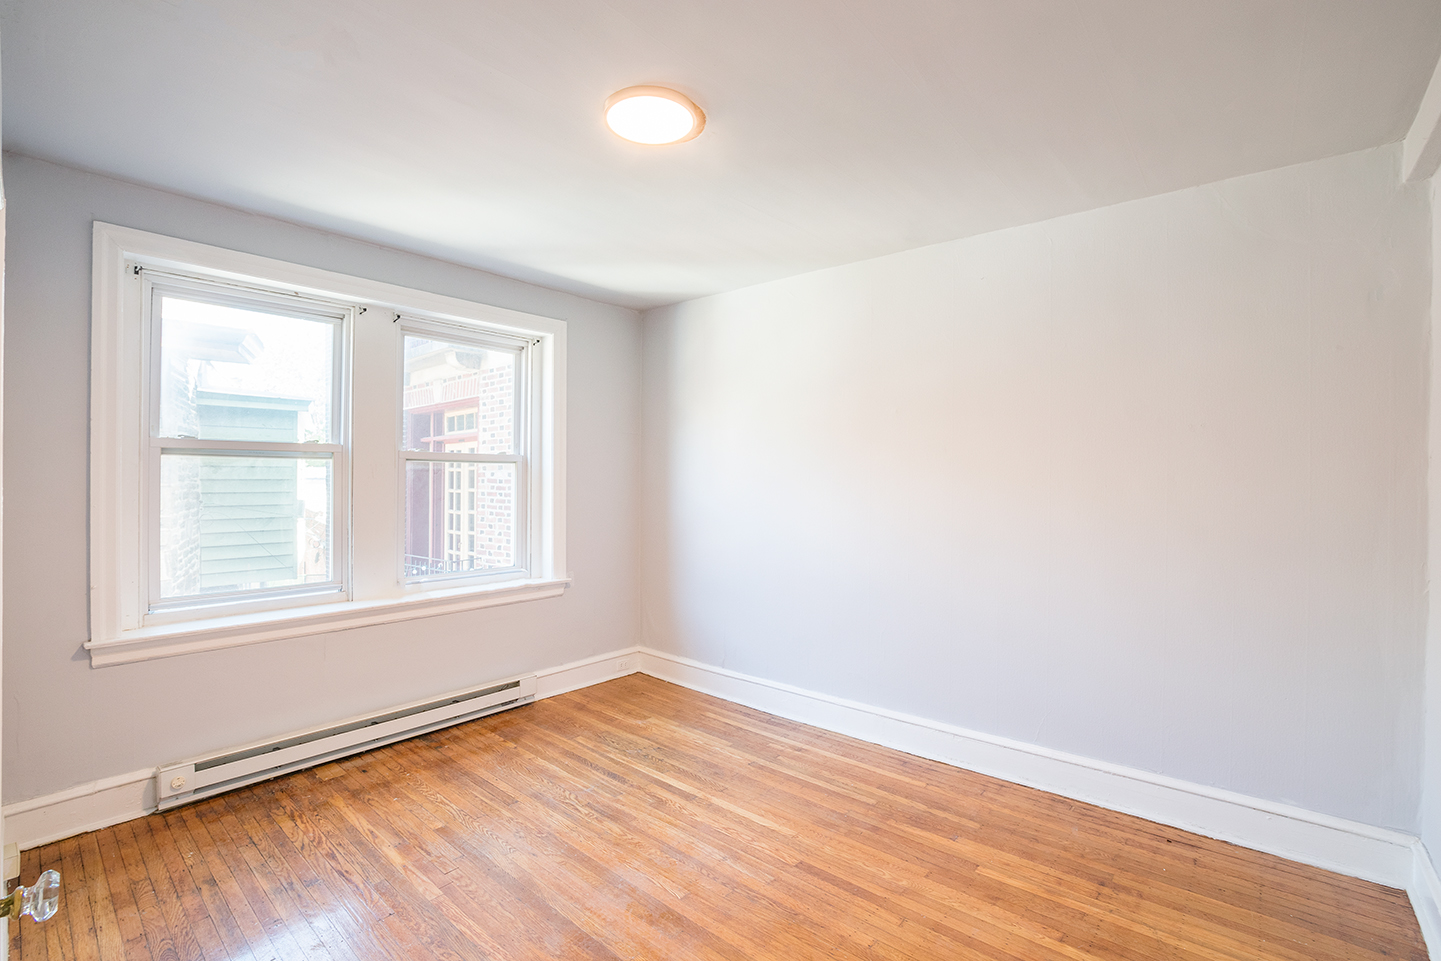 Property Photo For 2115 N. 63rd St, Unit 2C